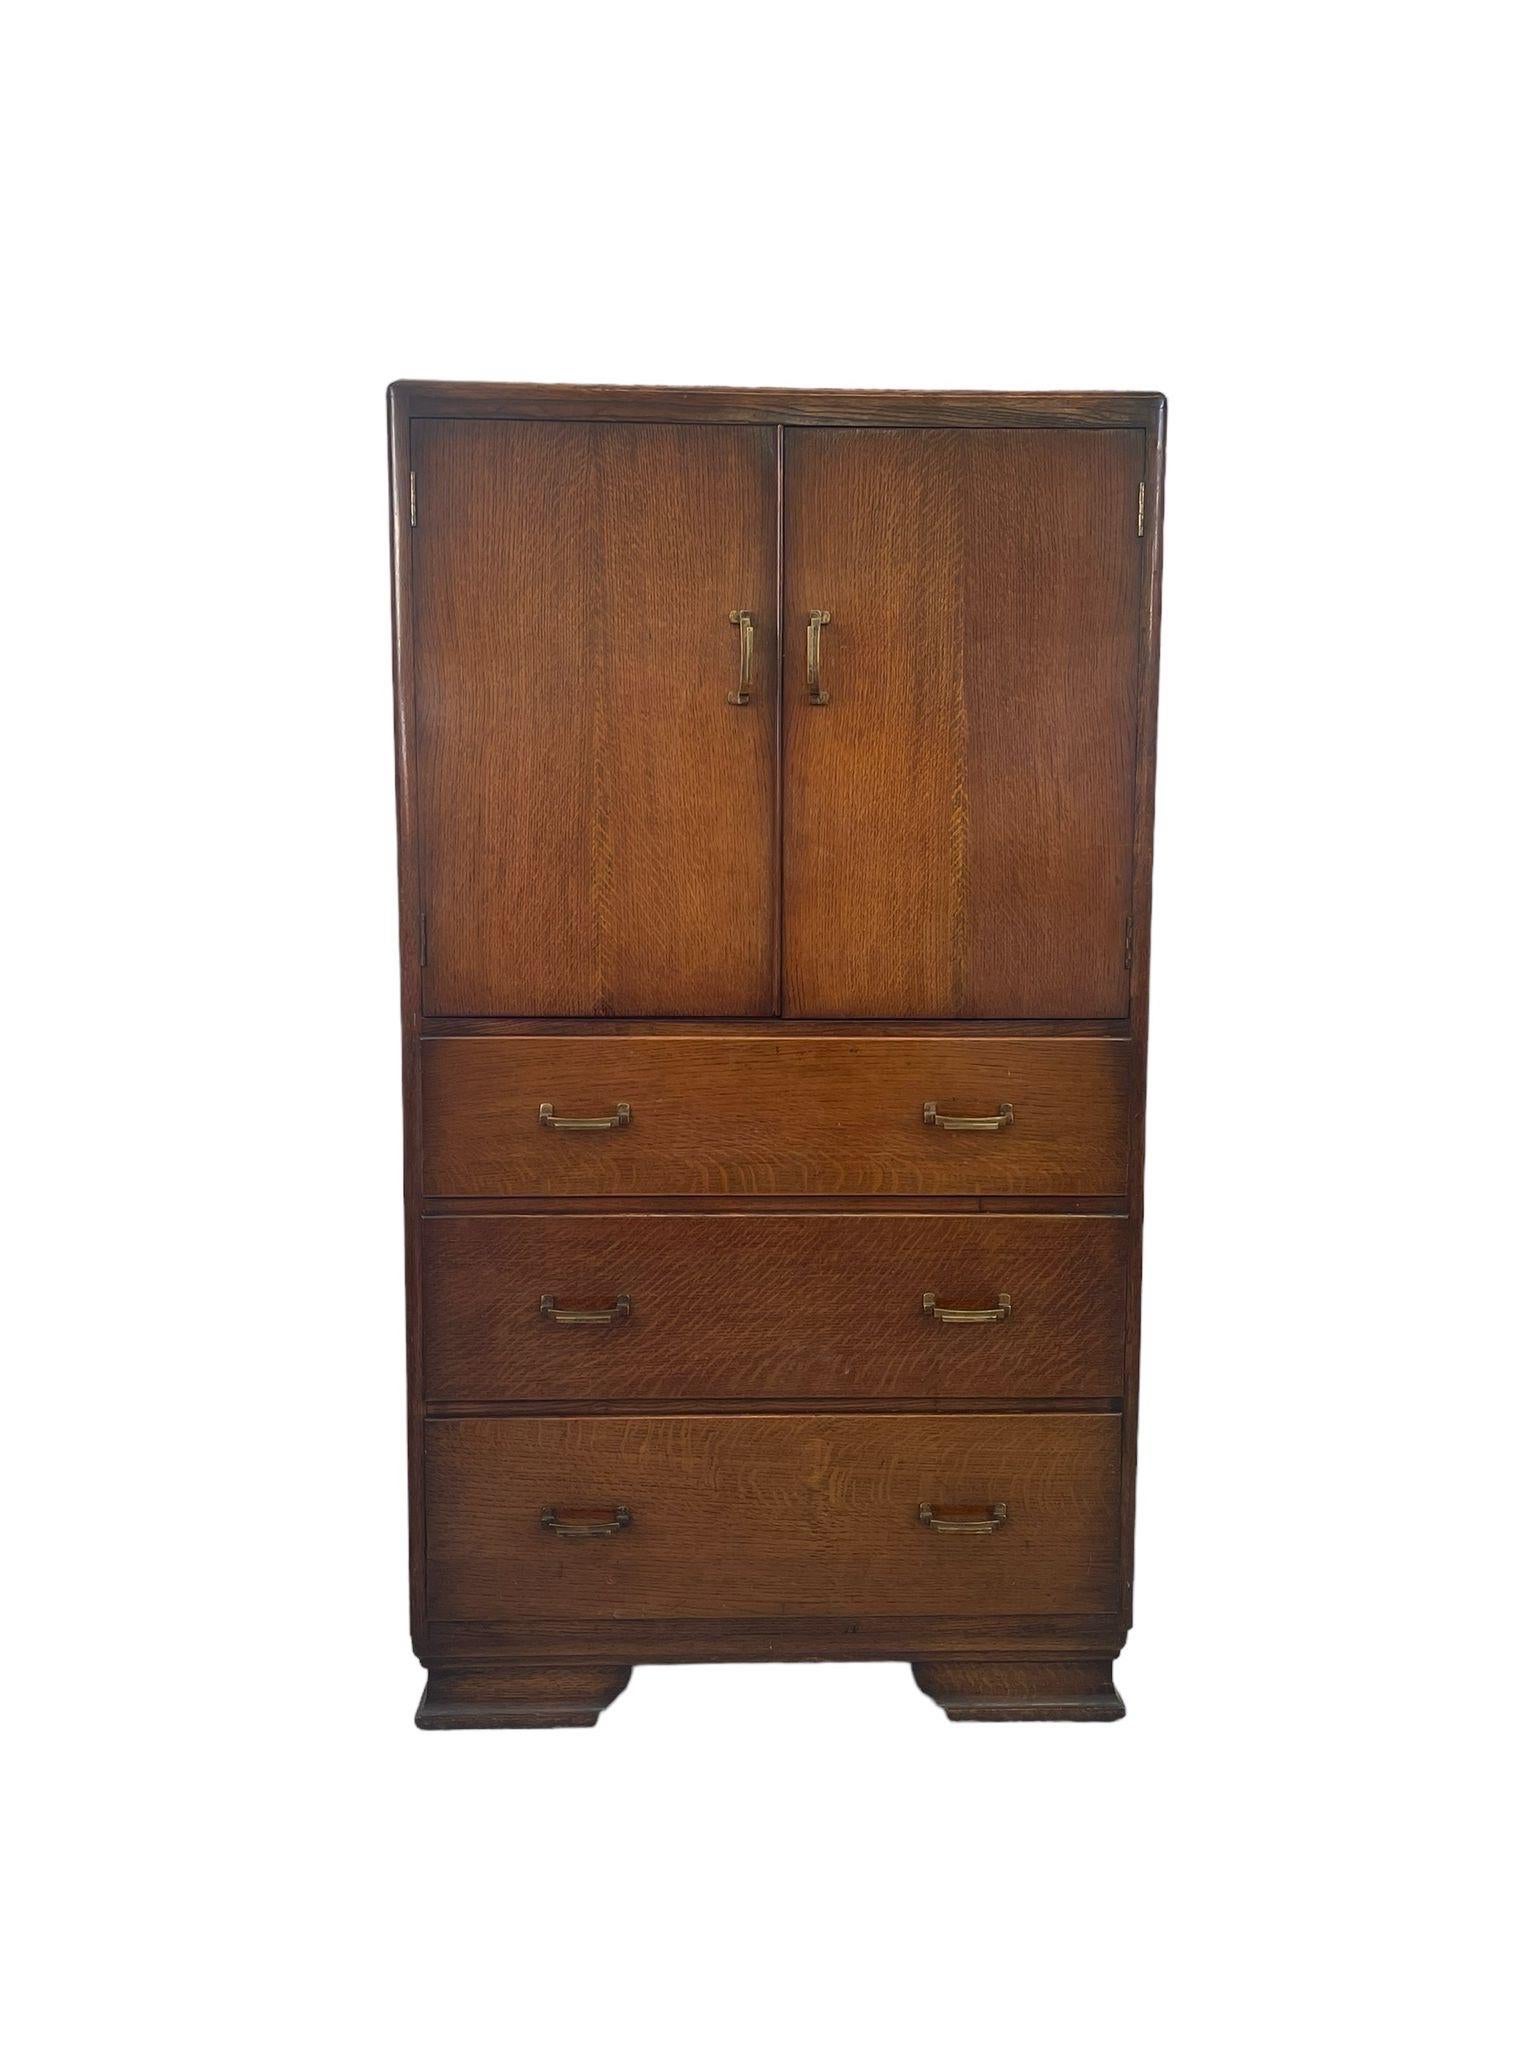 Vintage Dresser Possibly 1930s-1940s , the Style is of that Period. Three Drawers on the Bottom with a Cabinet Top. Brass Toned Hardware. Vintage Condition Consistent with Age as Pictured.

Dimensions. 30 W ; 18 D ; 54 H